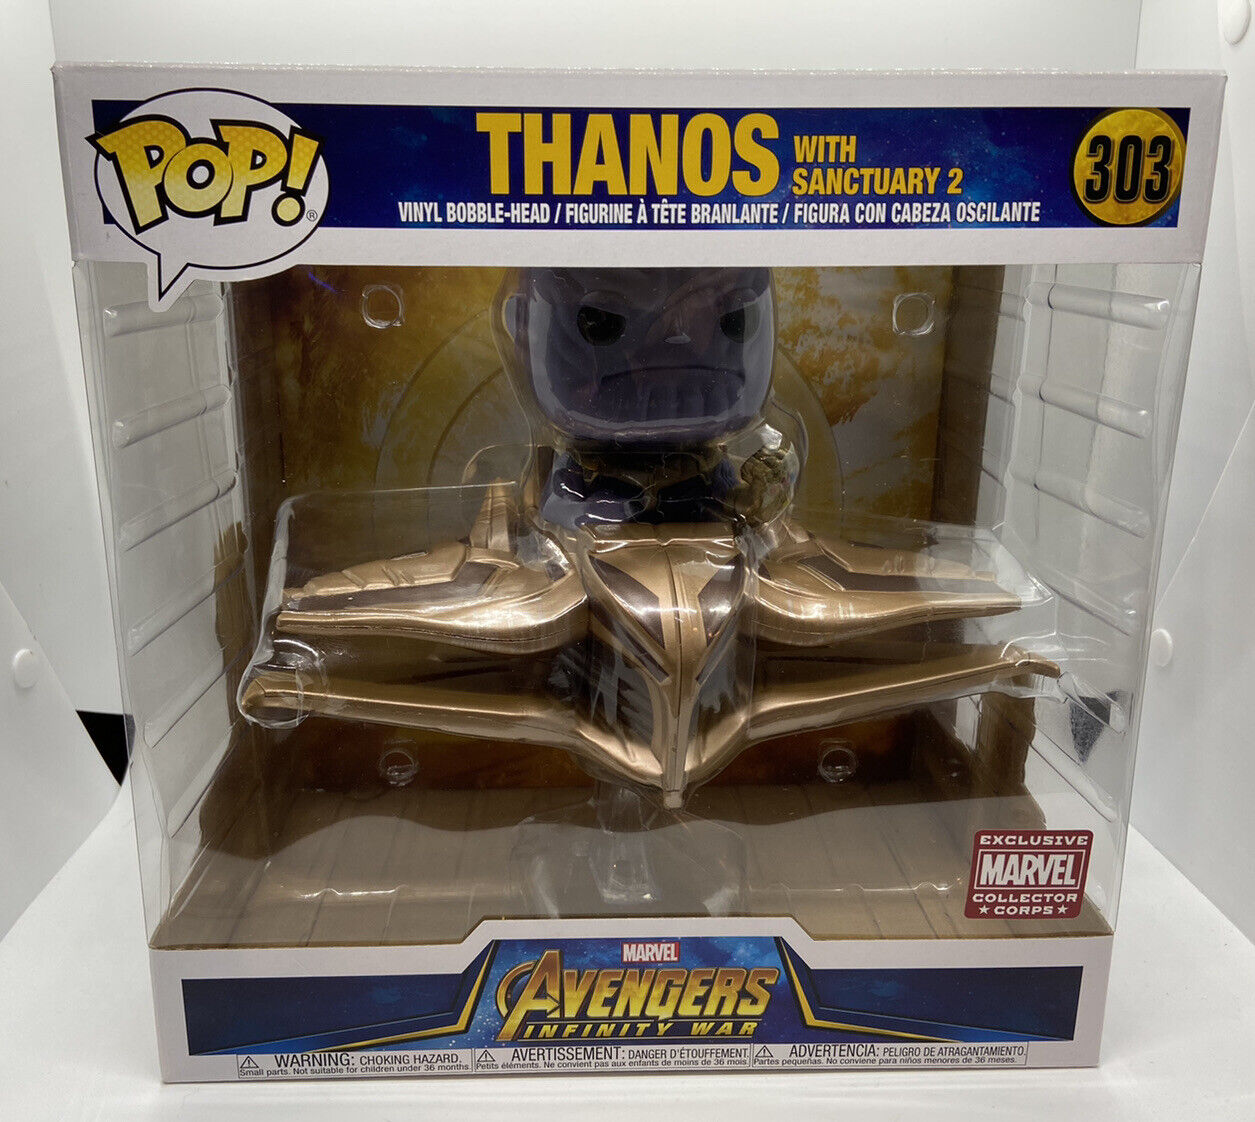 Marvel • #303 THANOS w/SANCTUARY 2 • Avengers Infinity War • Collector Corps Exc